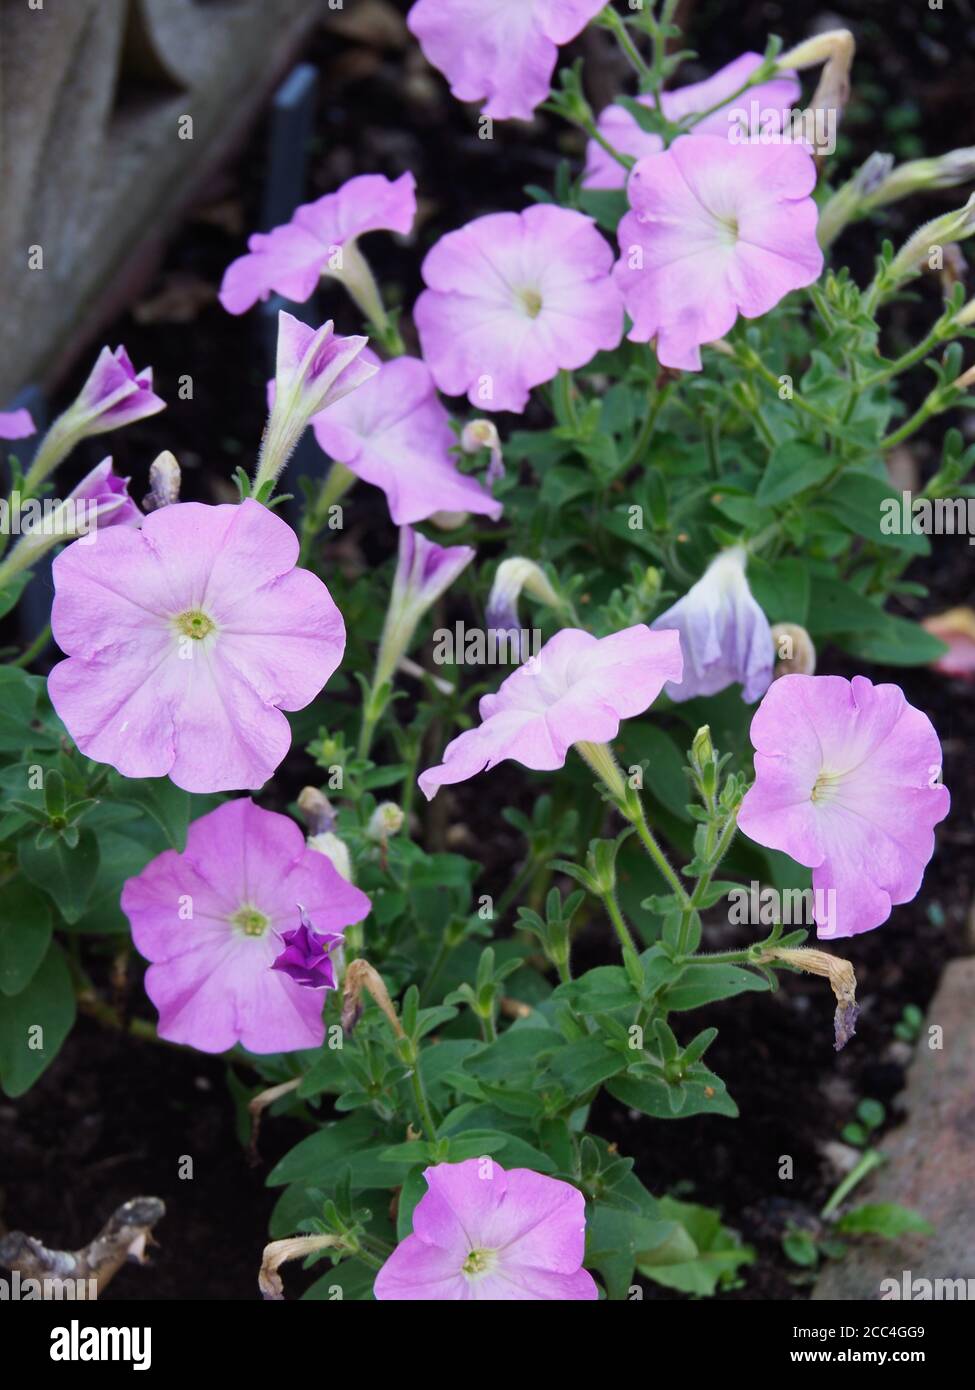 mauve petunia flowers growing in a garden flowerbed Stock Photo